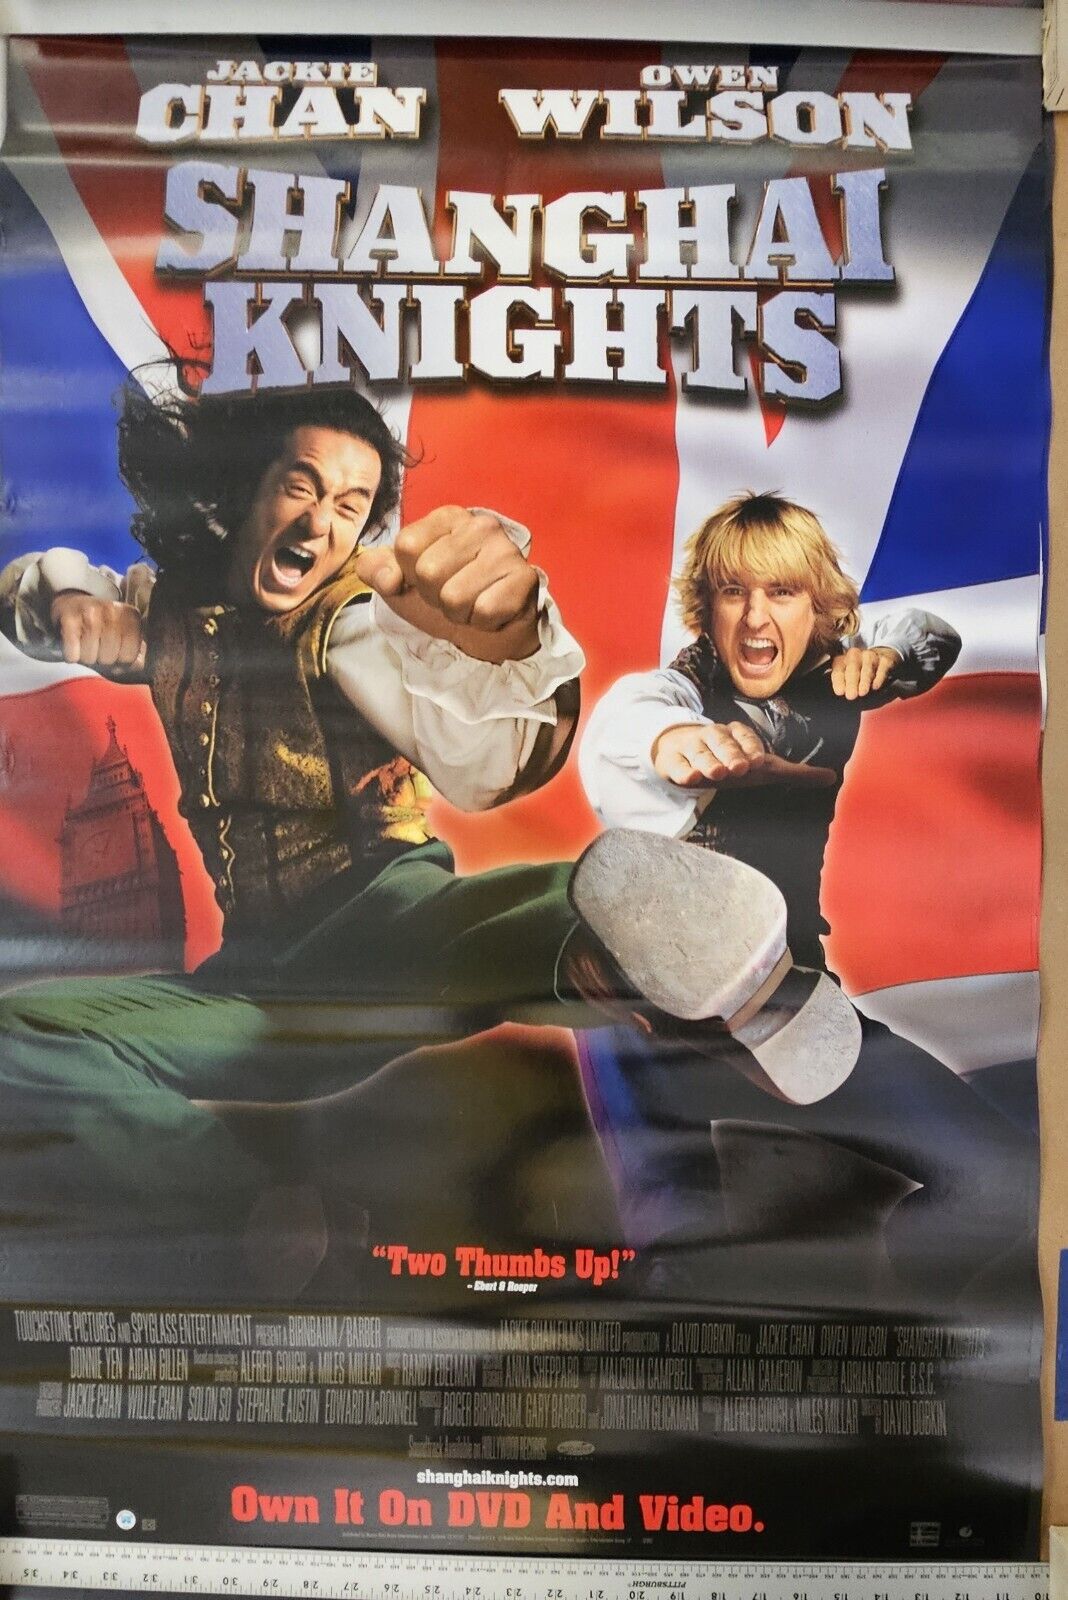 Jackie Chan And Owen Wilson in Shanghai Knights  26 x 39.75 DVD  Movie poster